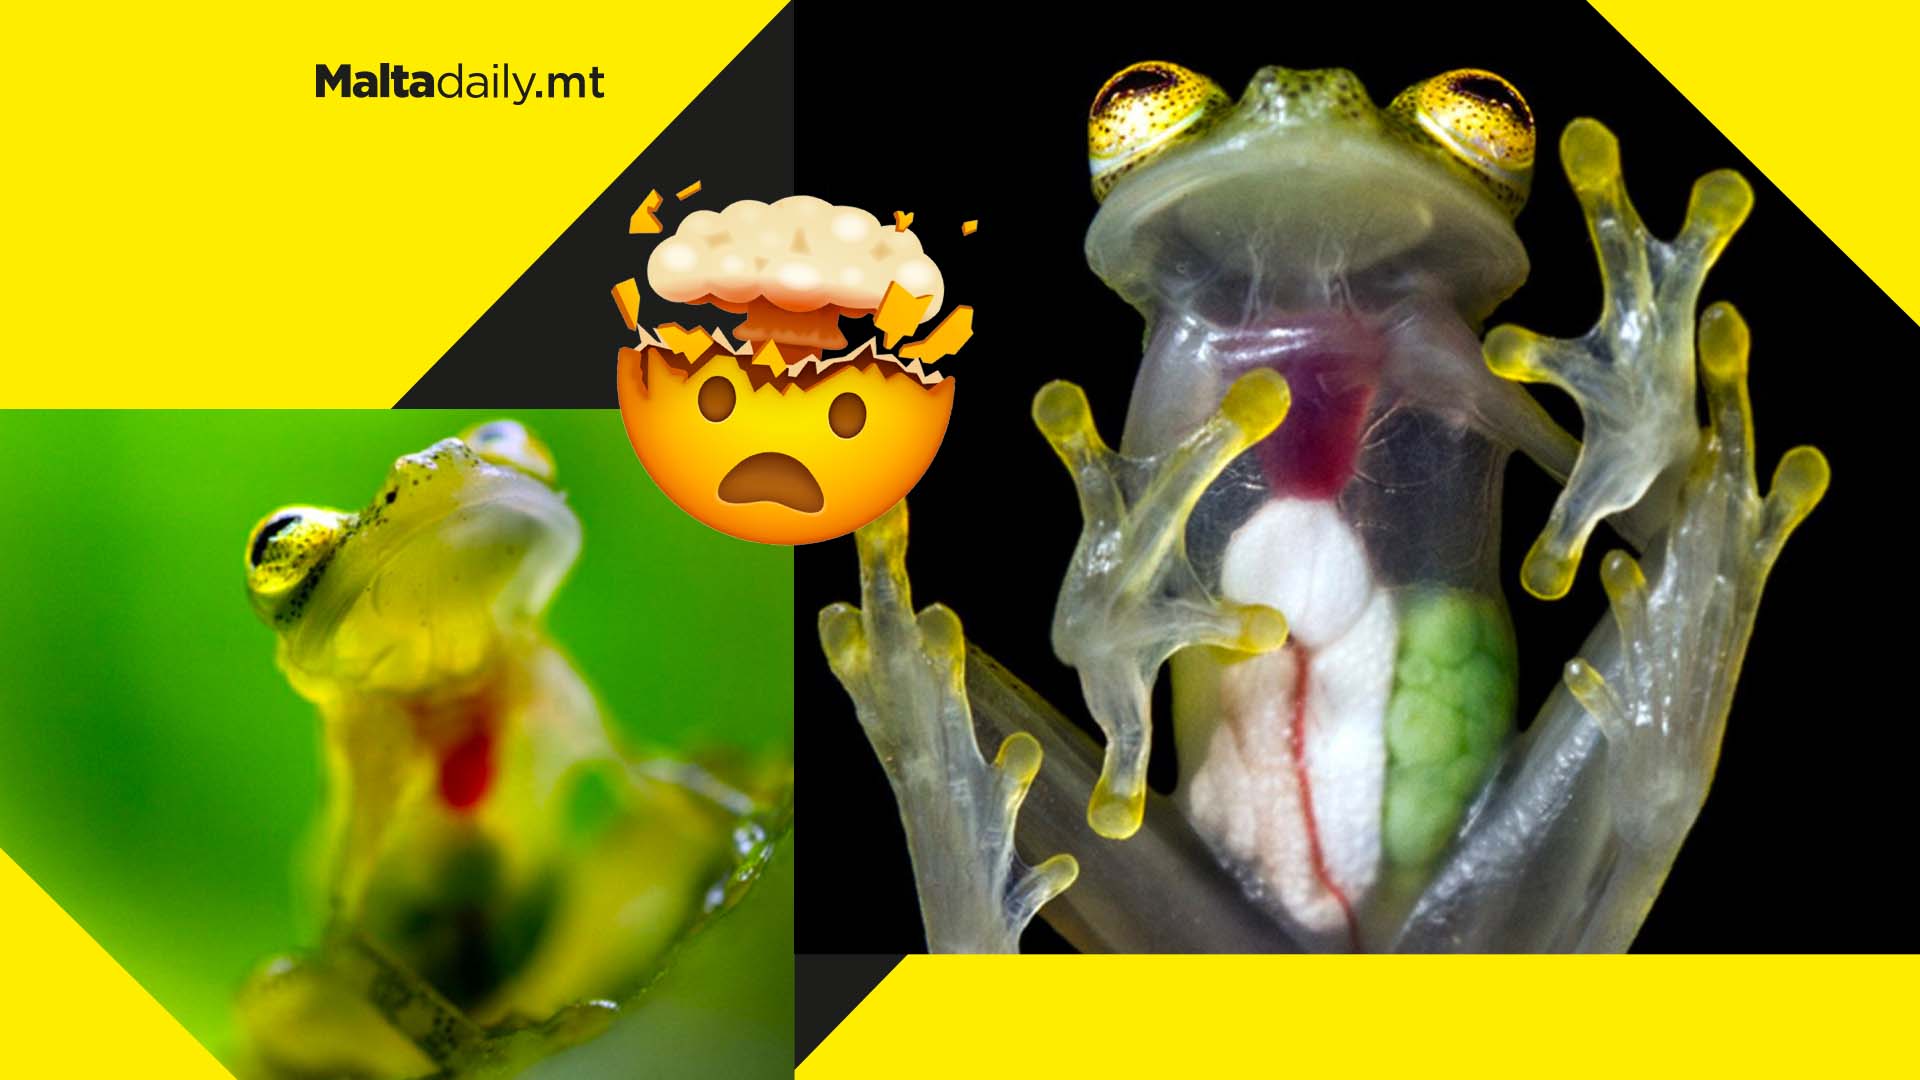 Two new frogs discovered in Ecuador are see-through